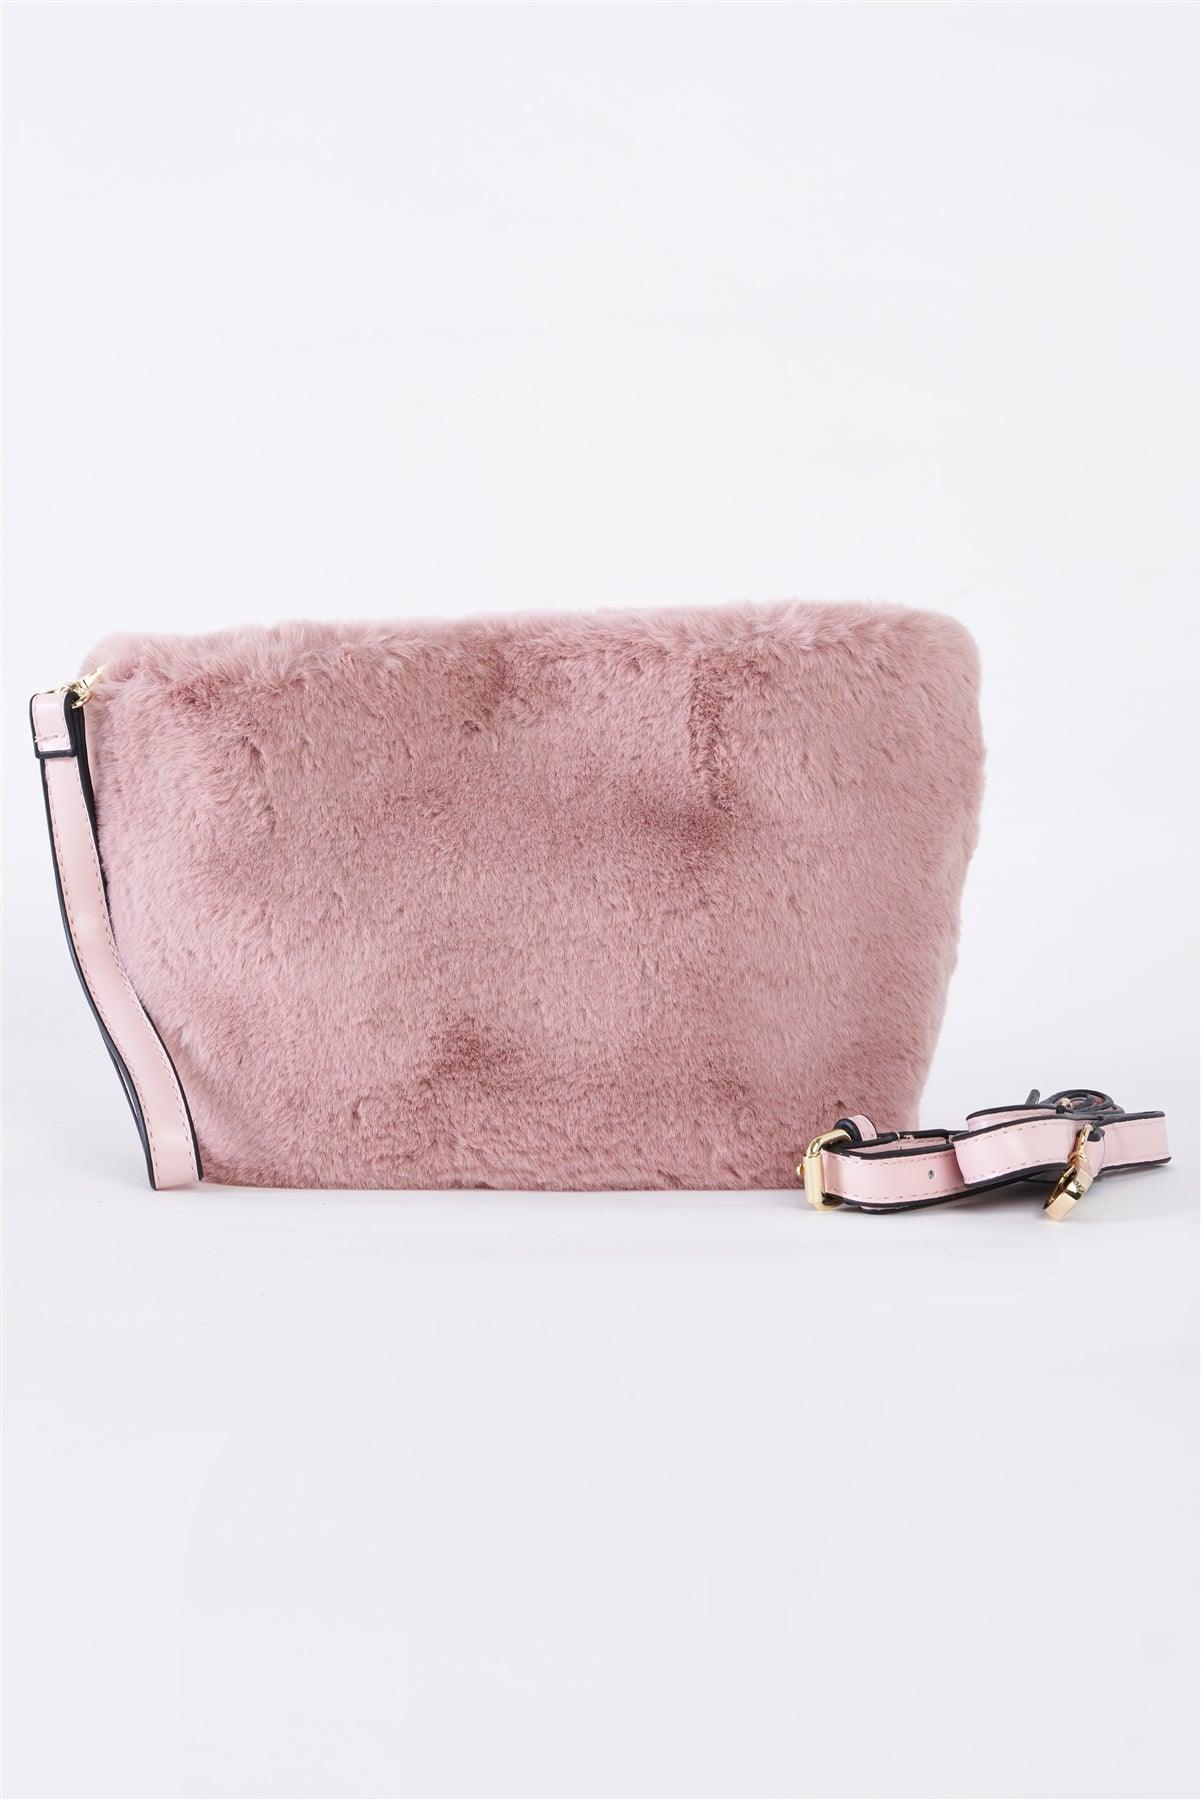 Pink Faux Fur Hidden Magnetic Snap Button Closure Crossbody Bag / Clutch With Hidden Hand Strap Loop / 3 bags